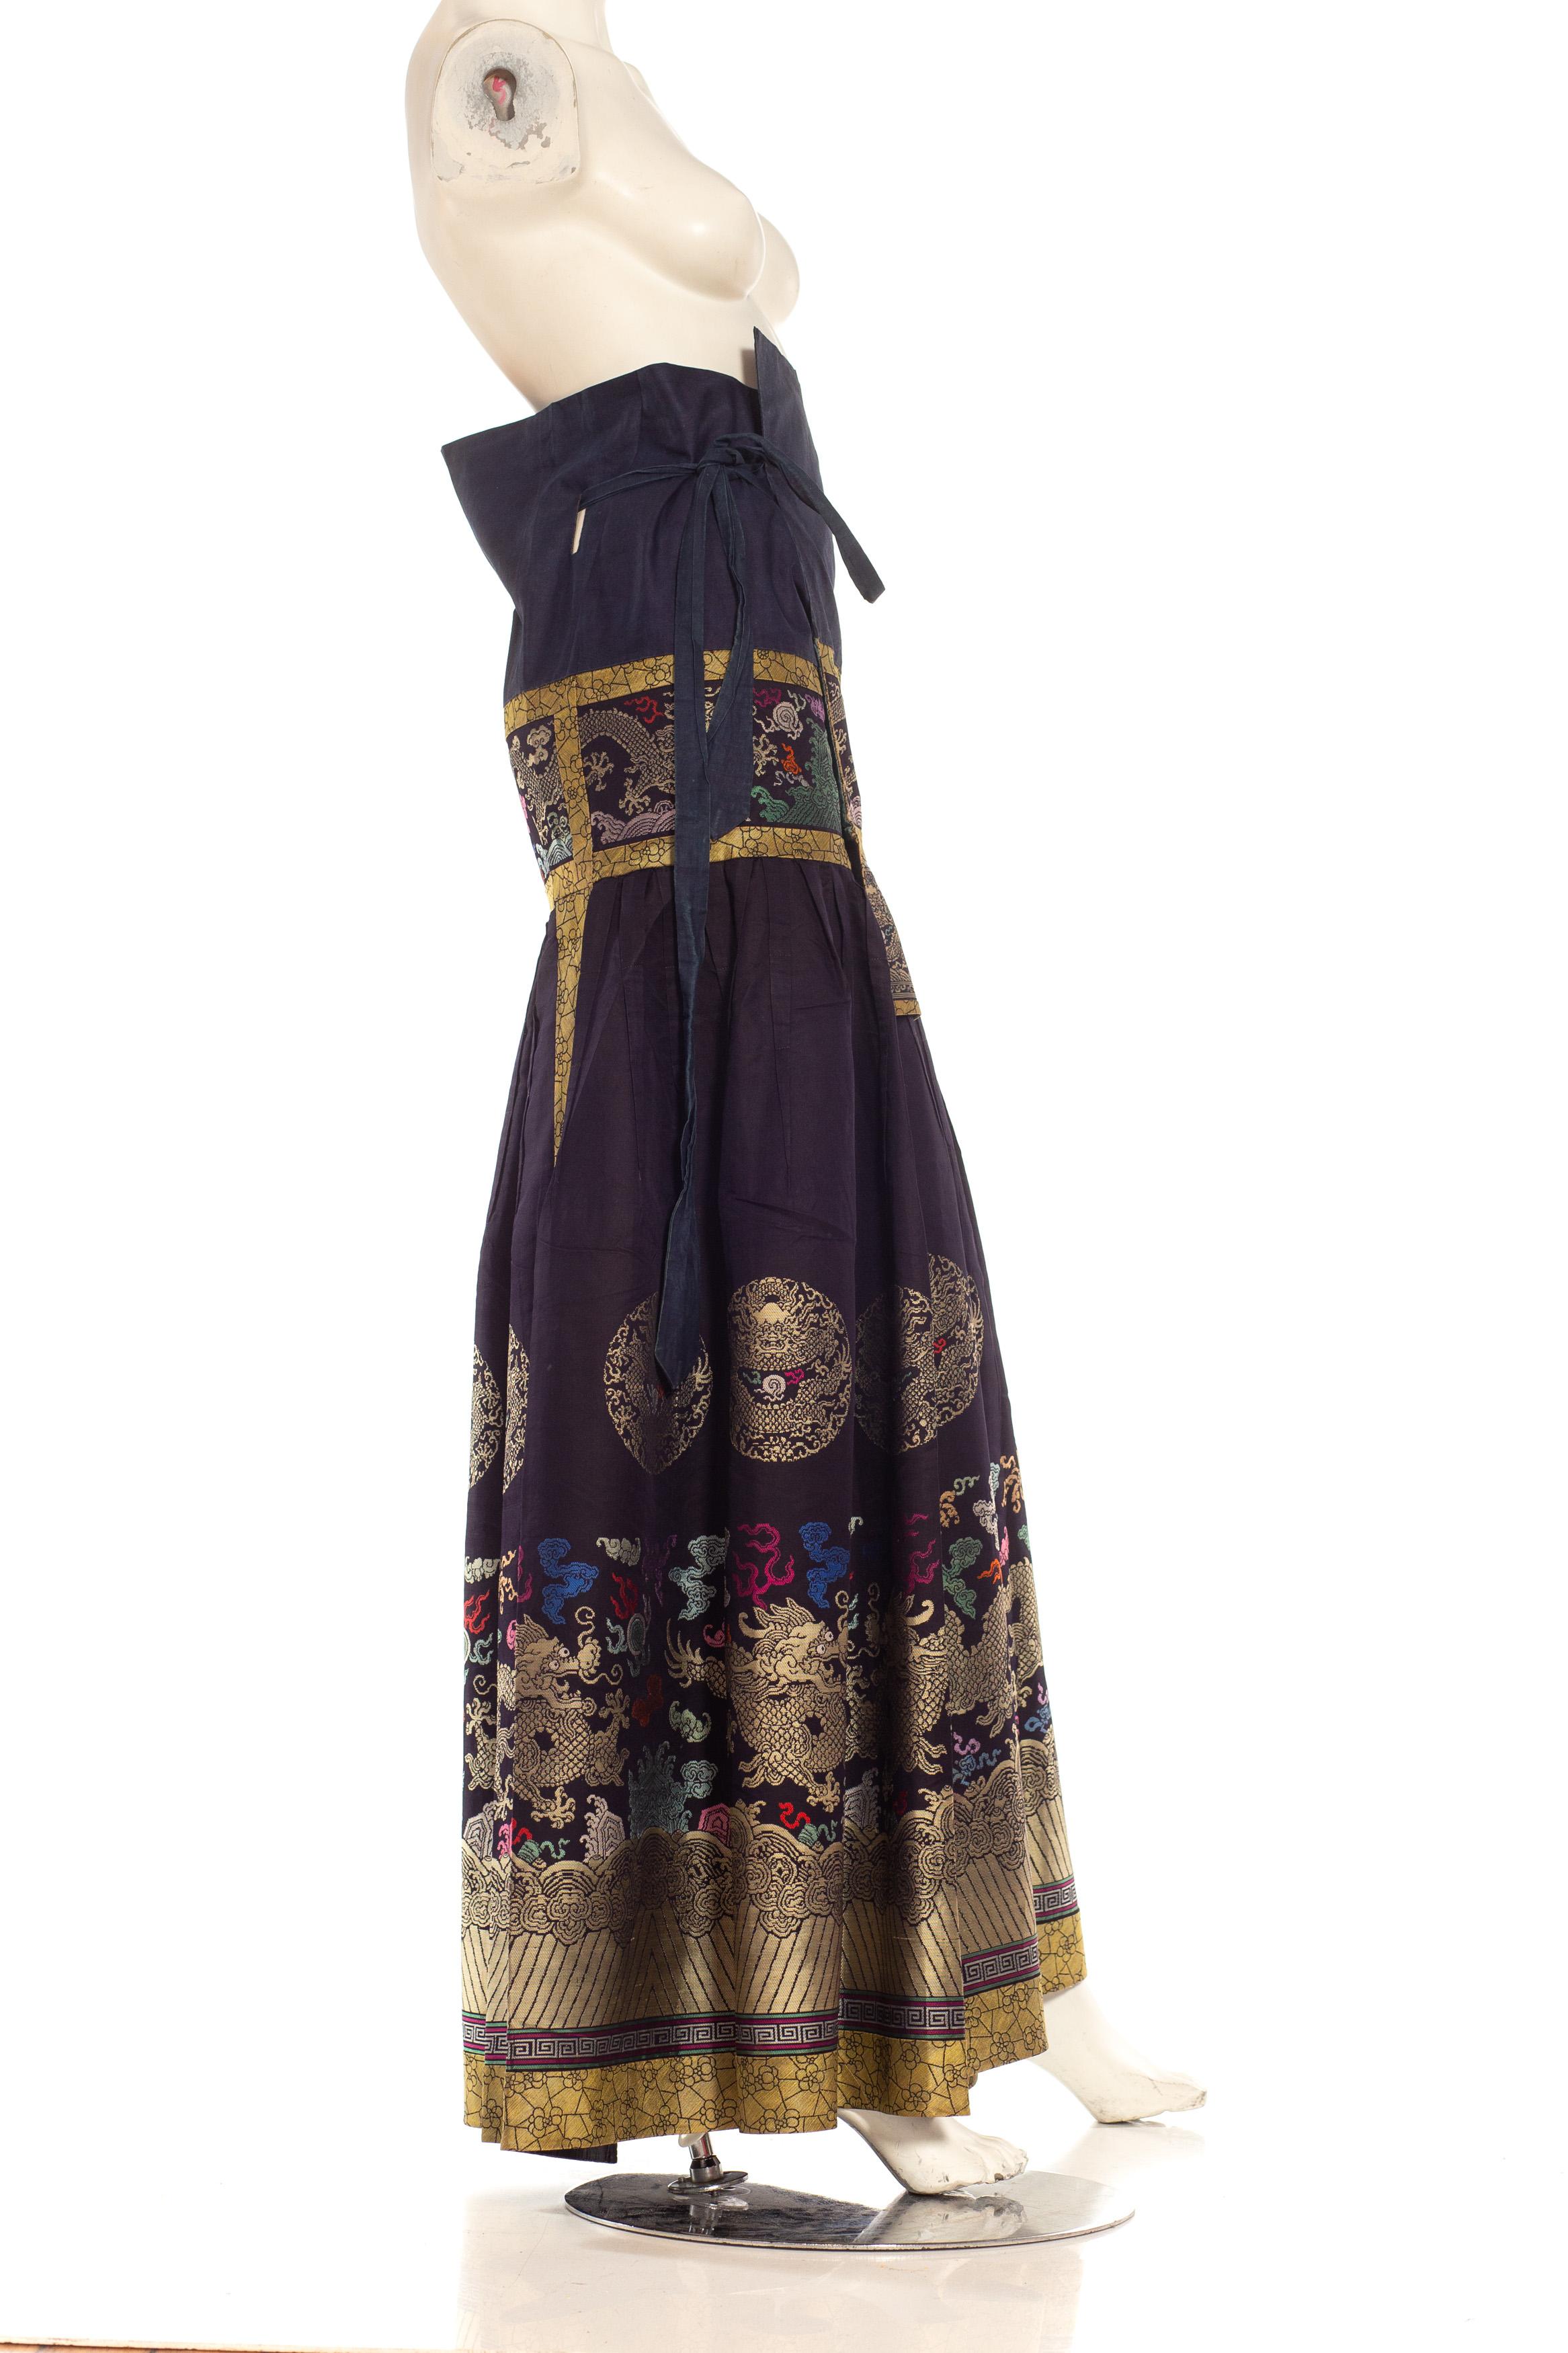 Navy Blue Multicolored Chinese Skirt


Pleated navy silk and multicolor with tie belt; depicts medallions and auspicious symbols with five-clawed dragons, fire, “flaming pearl of wisdom”, clouds, lishui waves, bats
